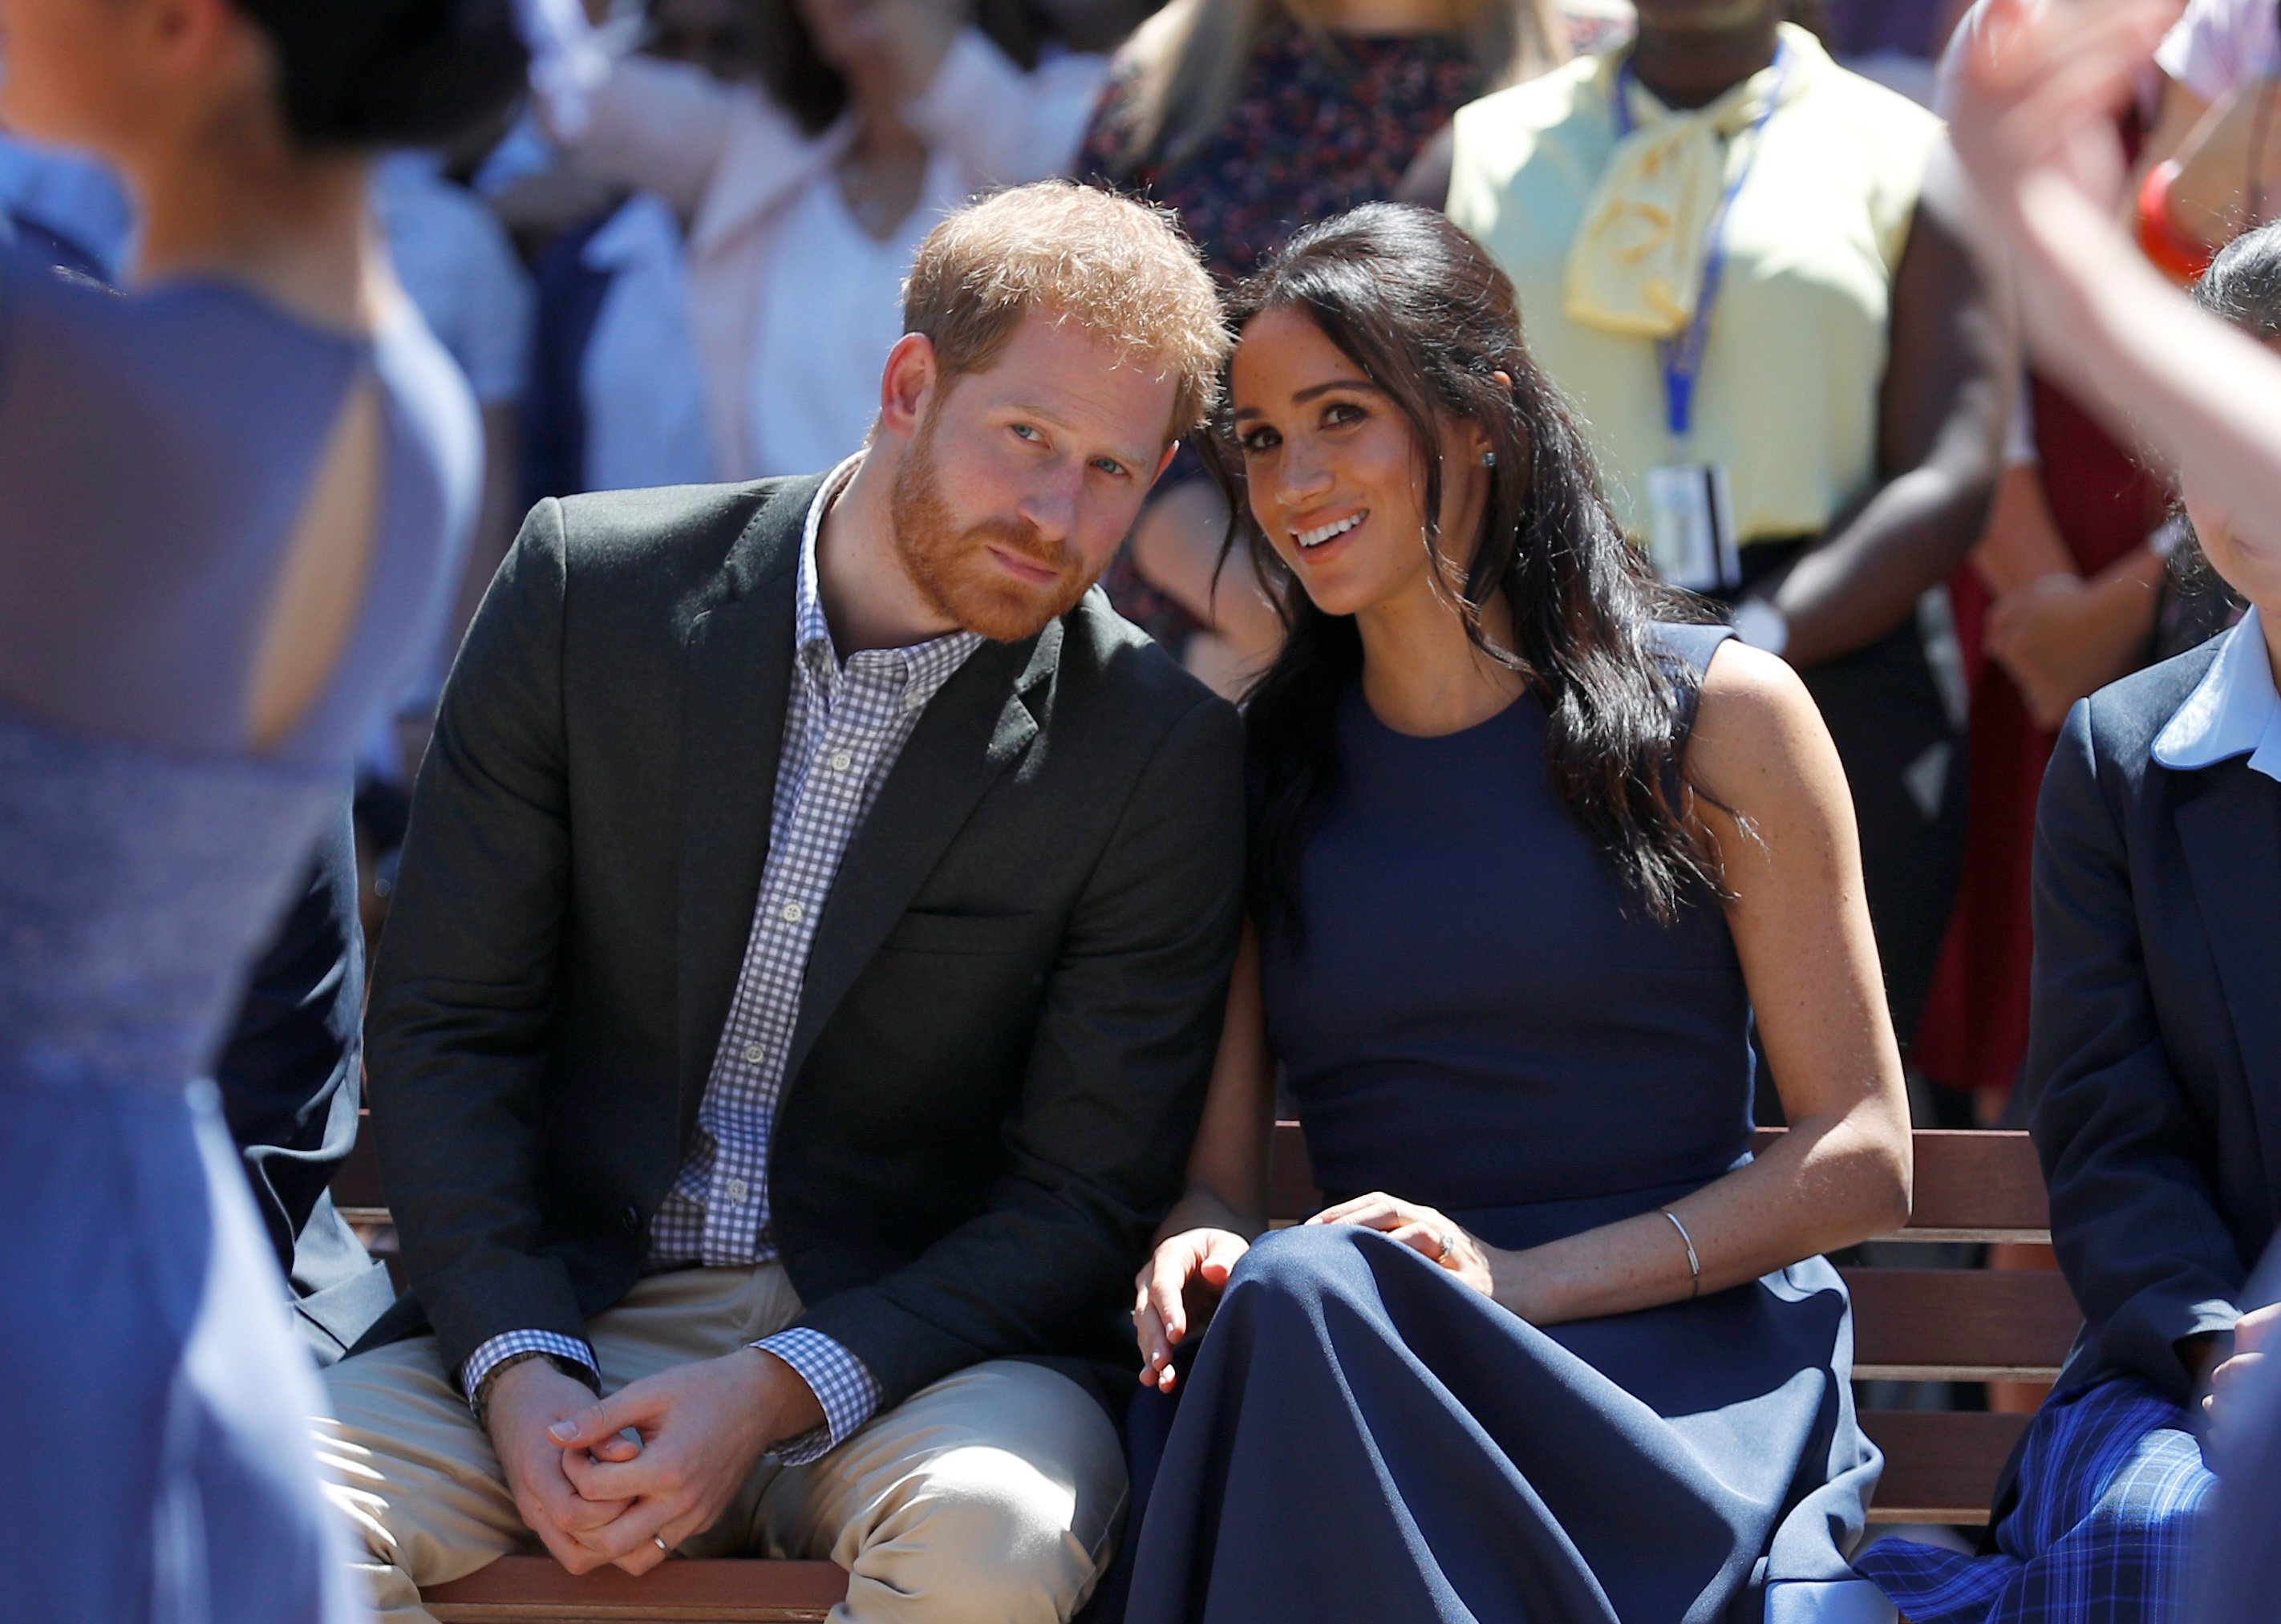 Prince Harry and Meghan Markle smile and attend an event.